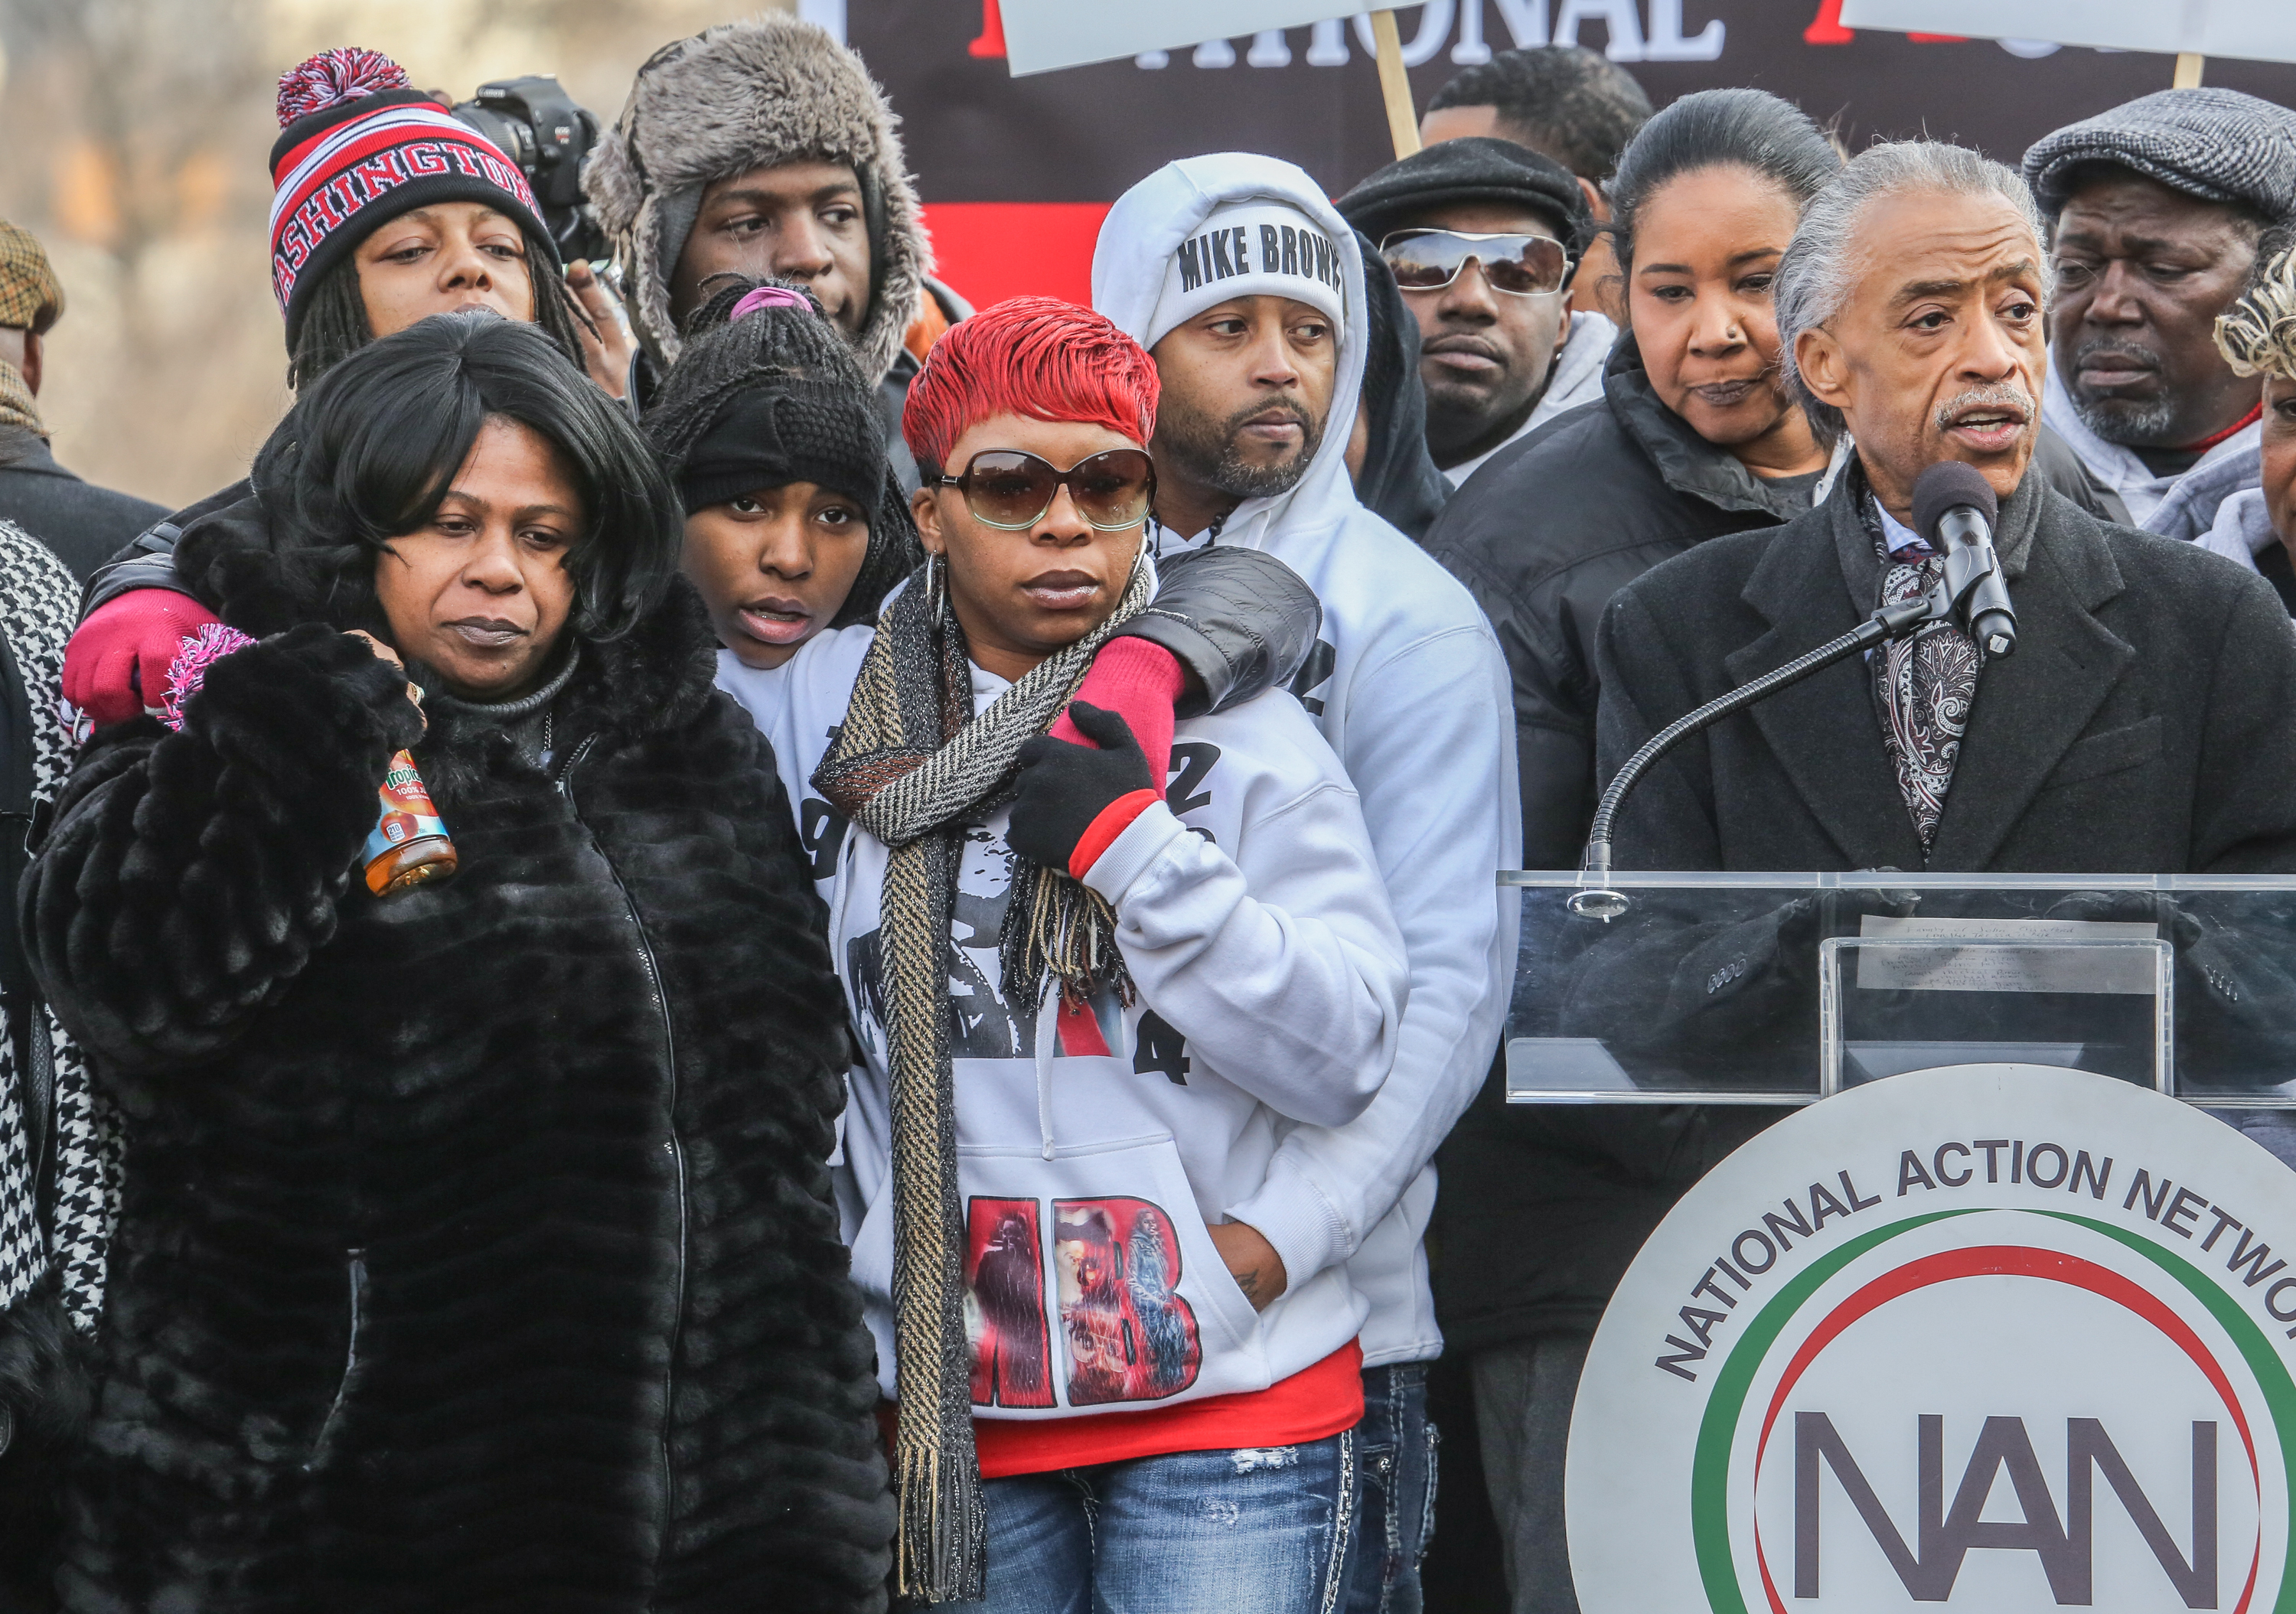 Samaria Rice (left), the mother of Tamir Rice, and Leslie McSpadden (right), the mother of Michael Brown, listen to Al Sharpton, at a march in Washington, D.C., on December 13, 2014. (Evelyn Hockstein/Washington Post—Getty Images)